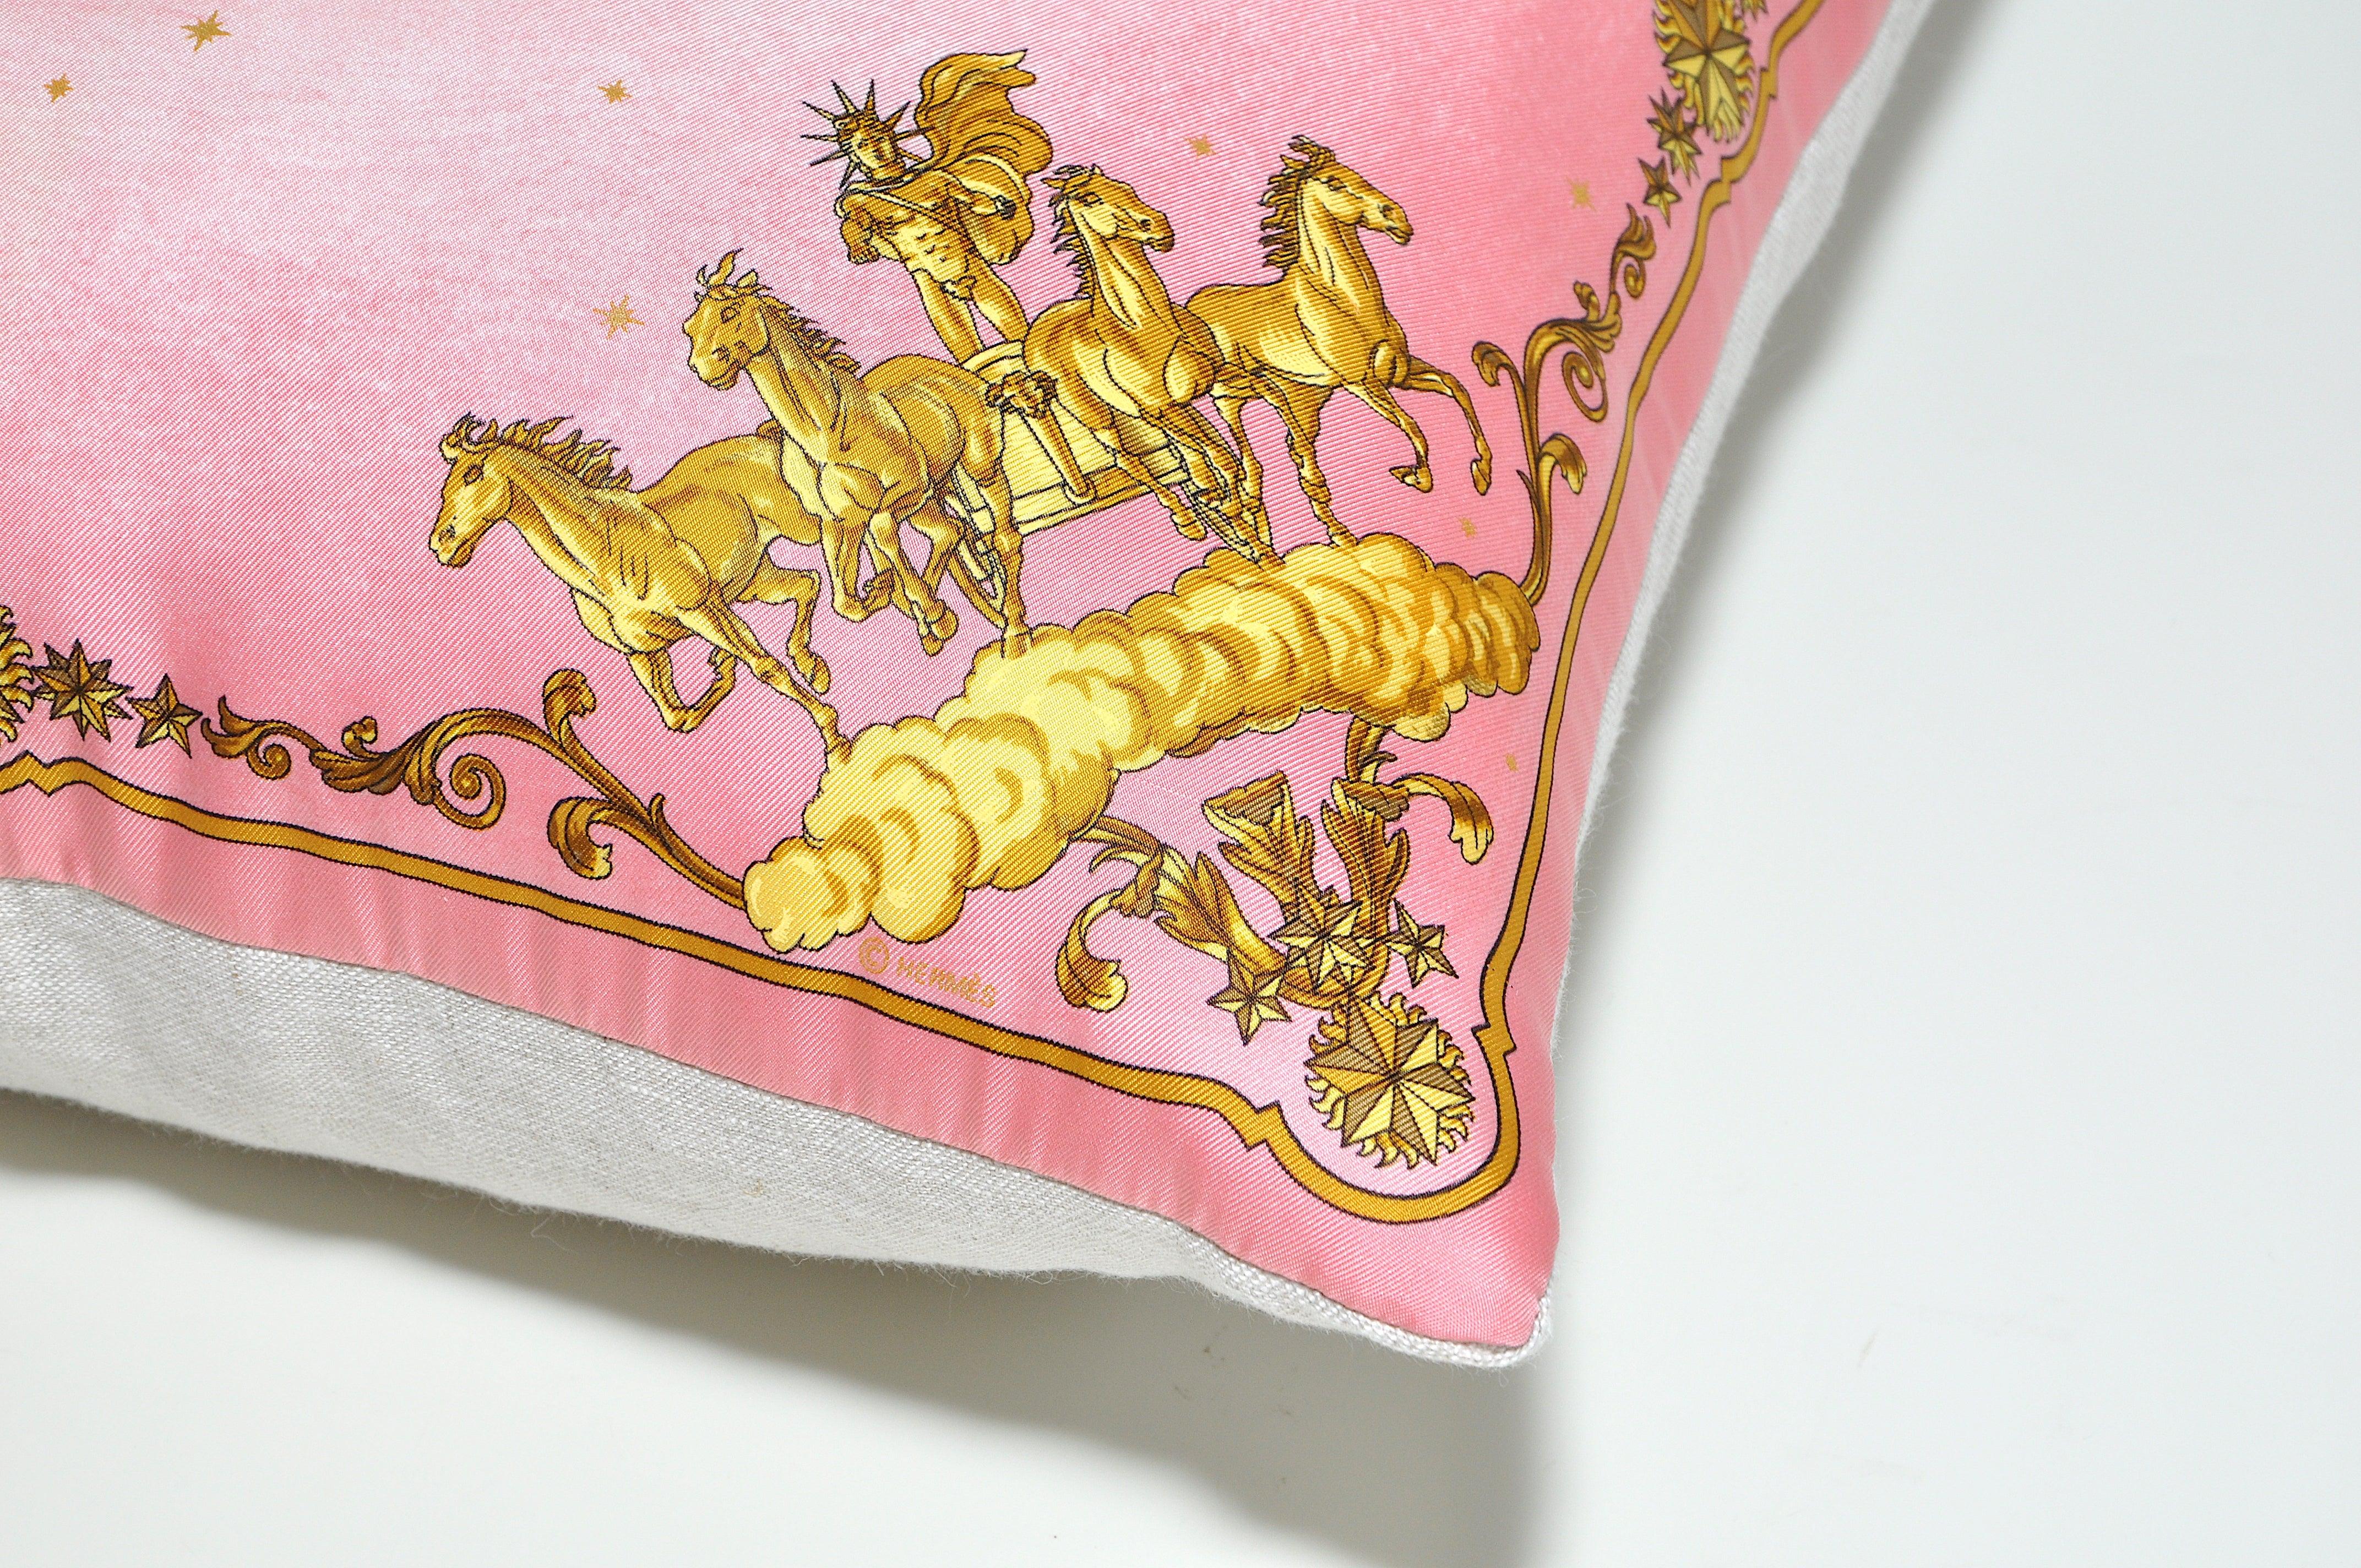 The ‘crème de la crème’ of scarves, this beauty is a one-of-a-kind custom made luxury cushion (pillow) from an exquisite vintage silk mythological themed Hermes fashion scarf designed by Philippe Ledoux, who has created many beautiful ‘carrés' for